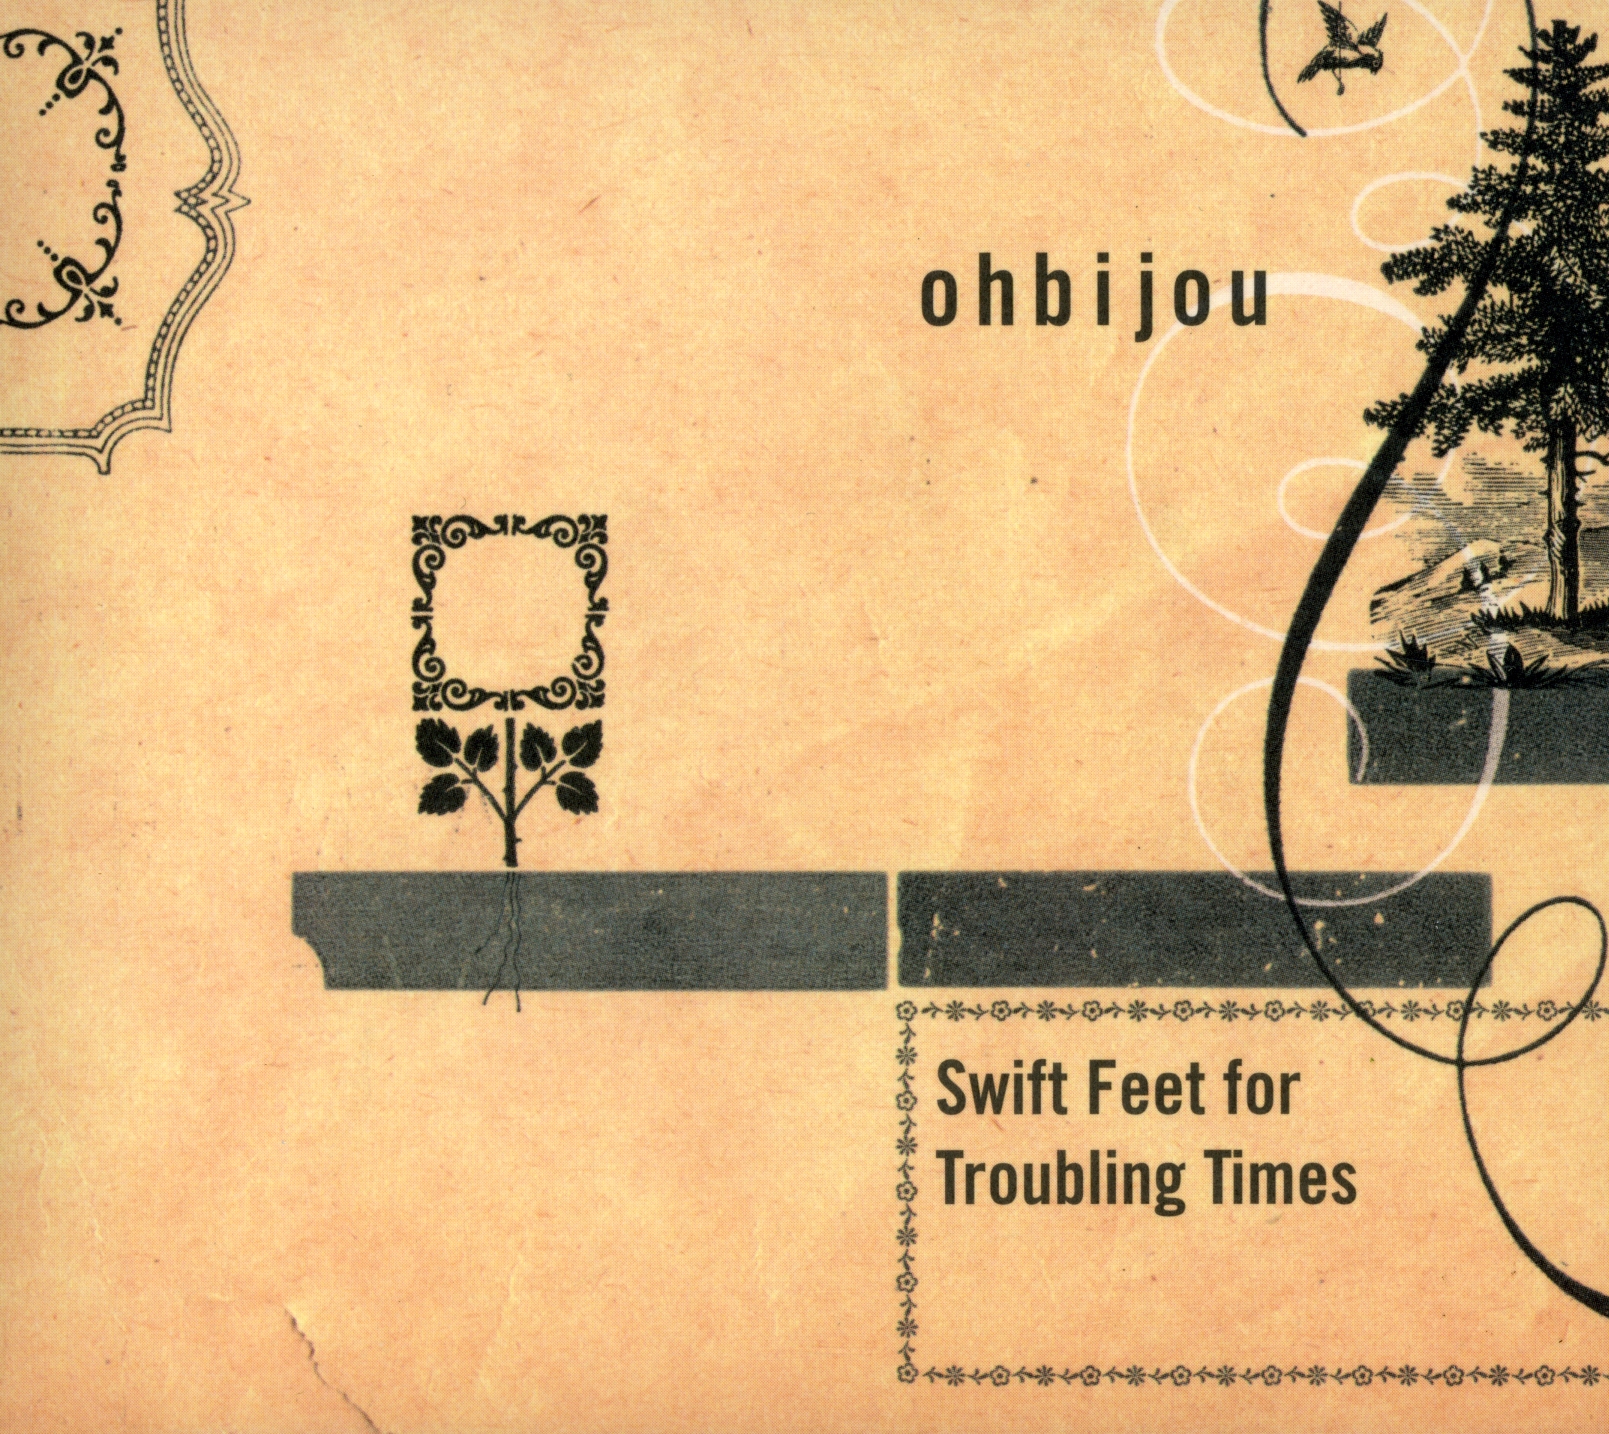 SWIFT FEET FOR TROUBLING TIMES (CAN)